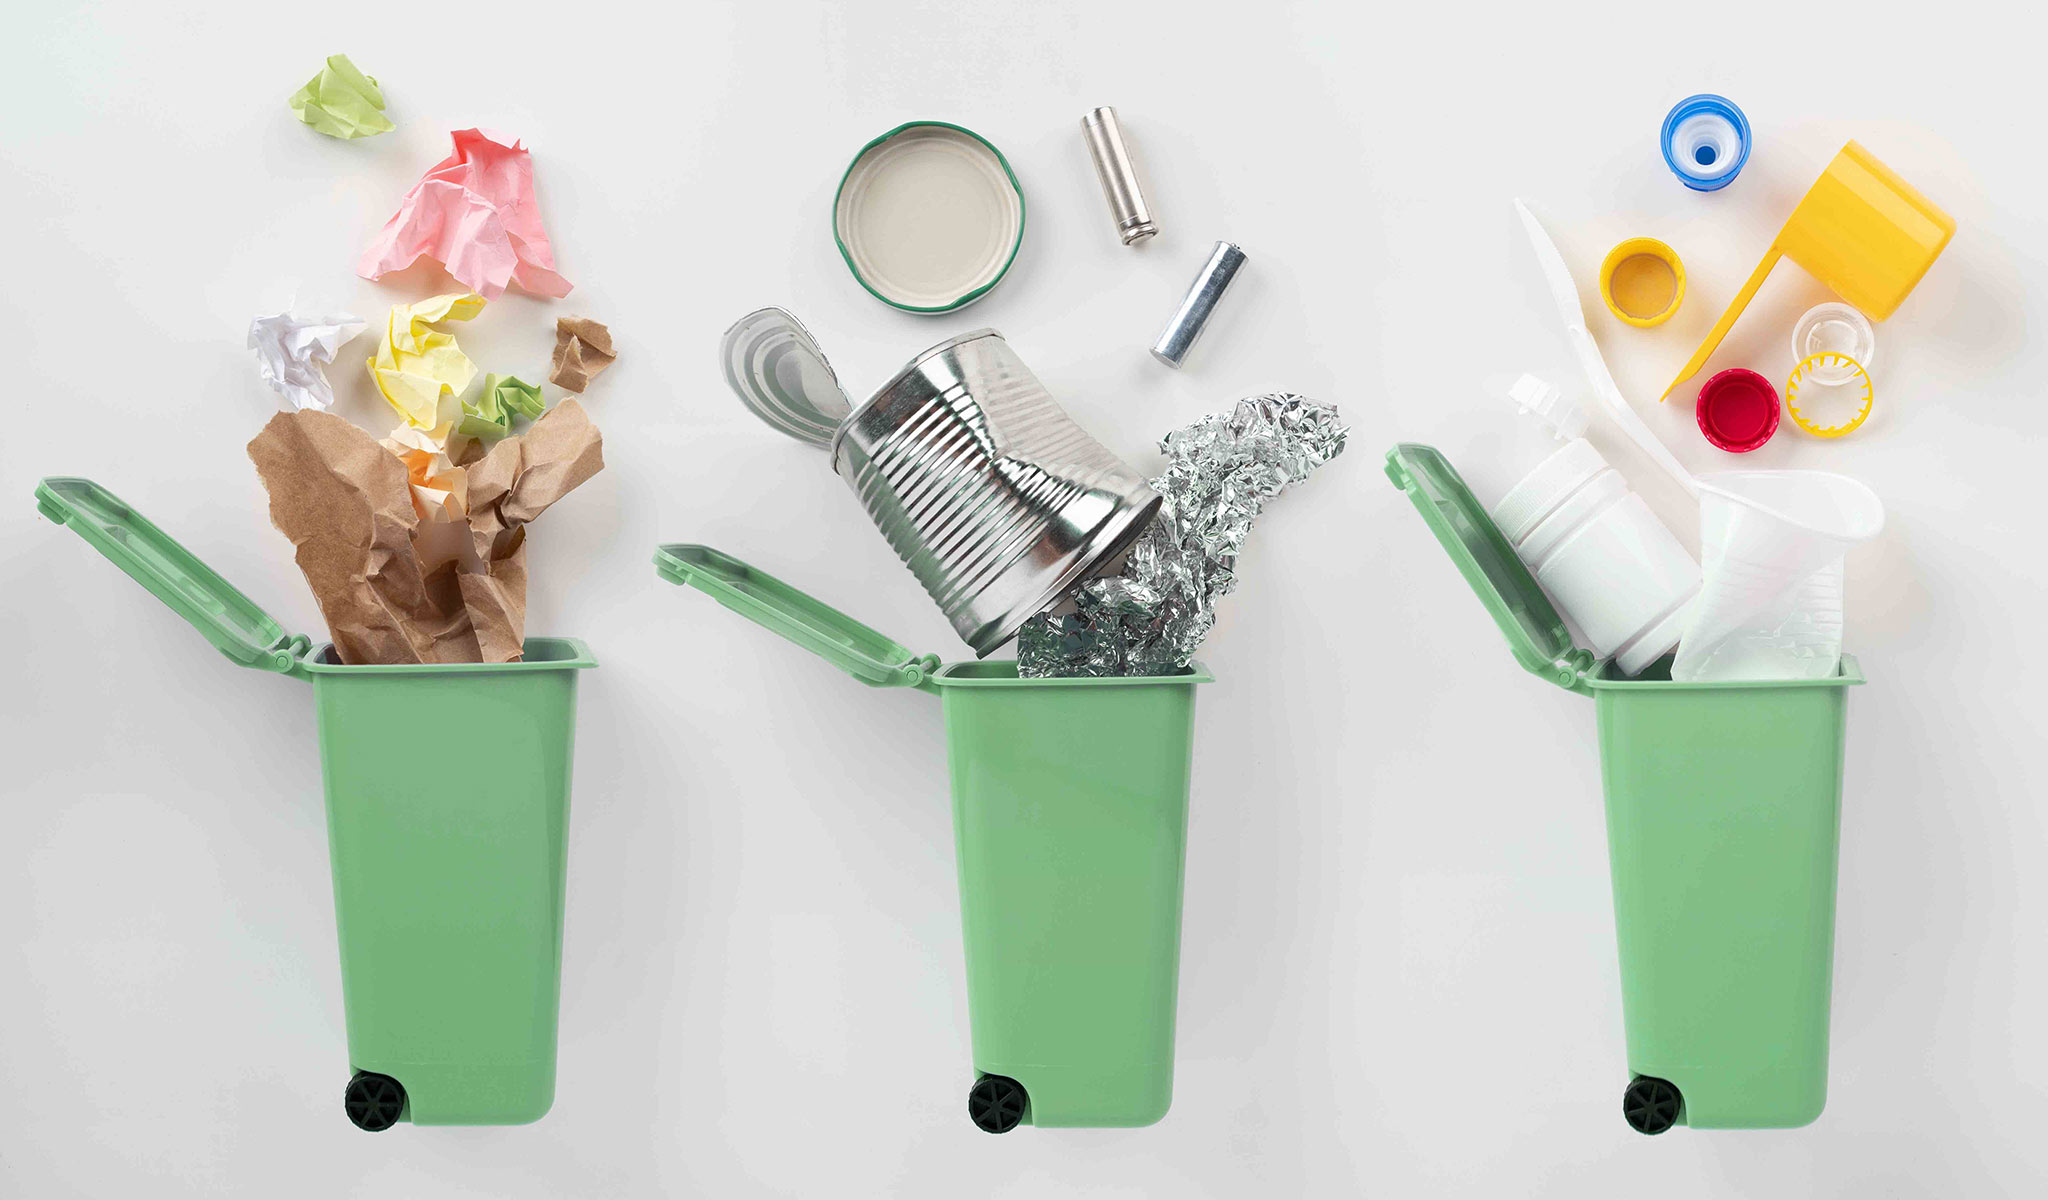 Is Recycling Worth It? Costs and Benefits of Recycling